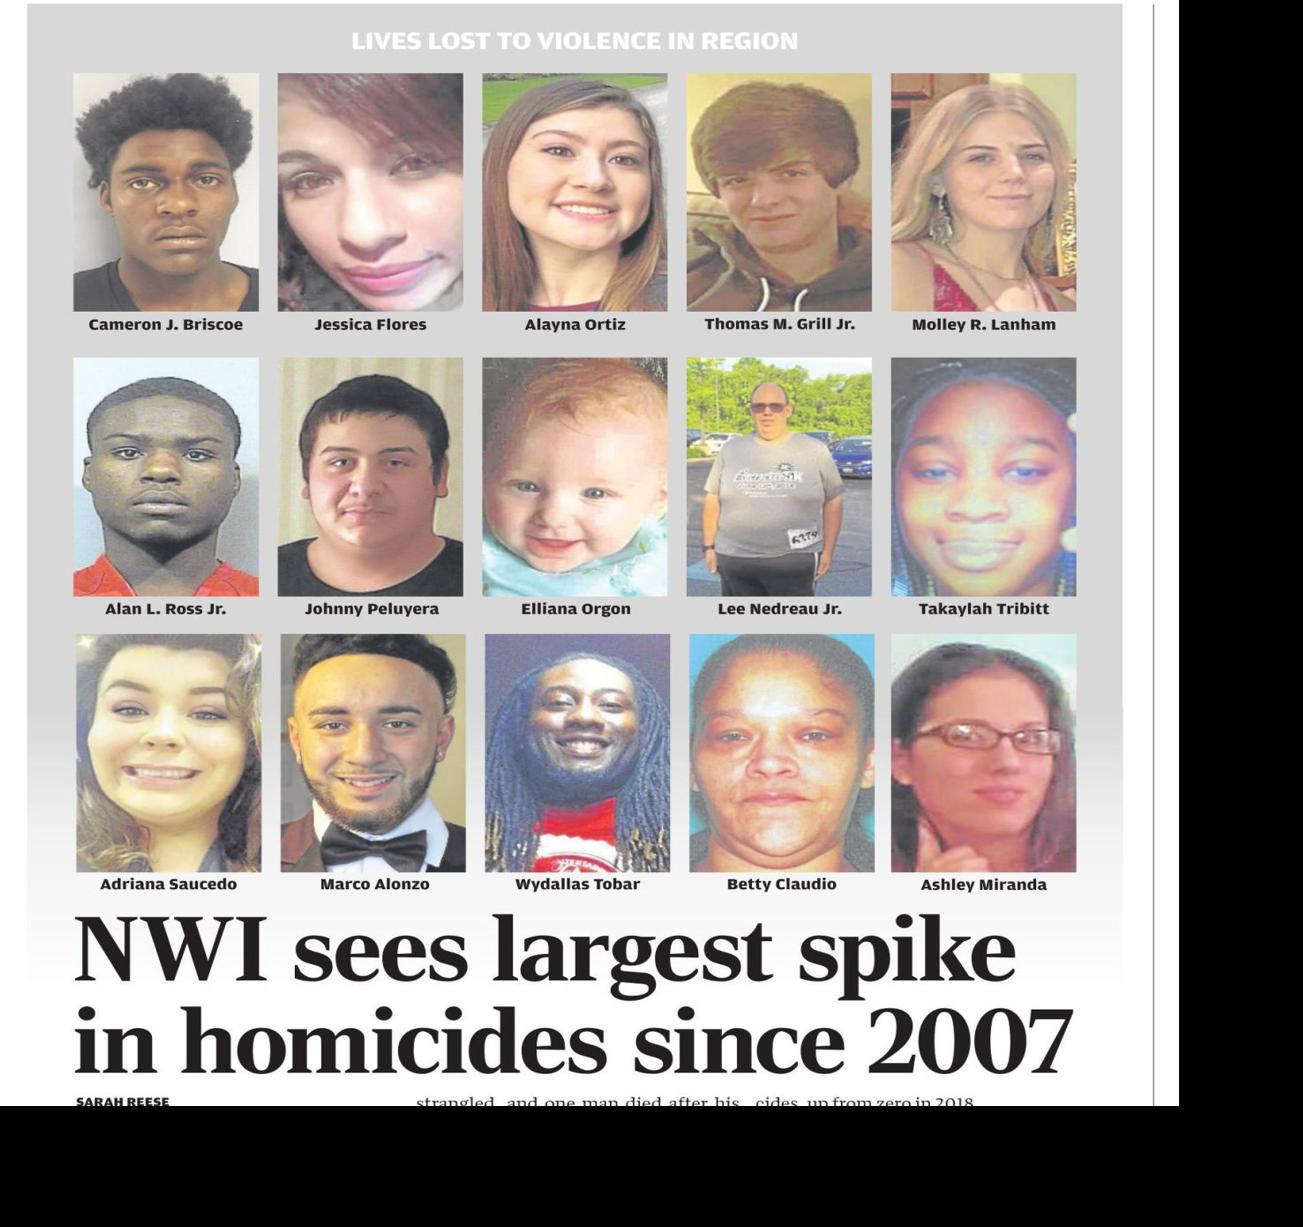 EDITORIAL Look at the faces of homicide victims, resolve to act